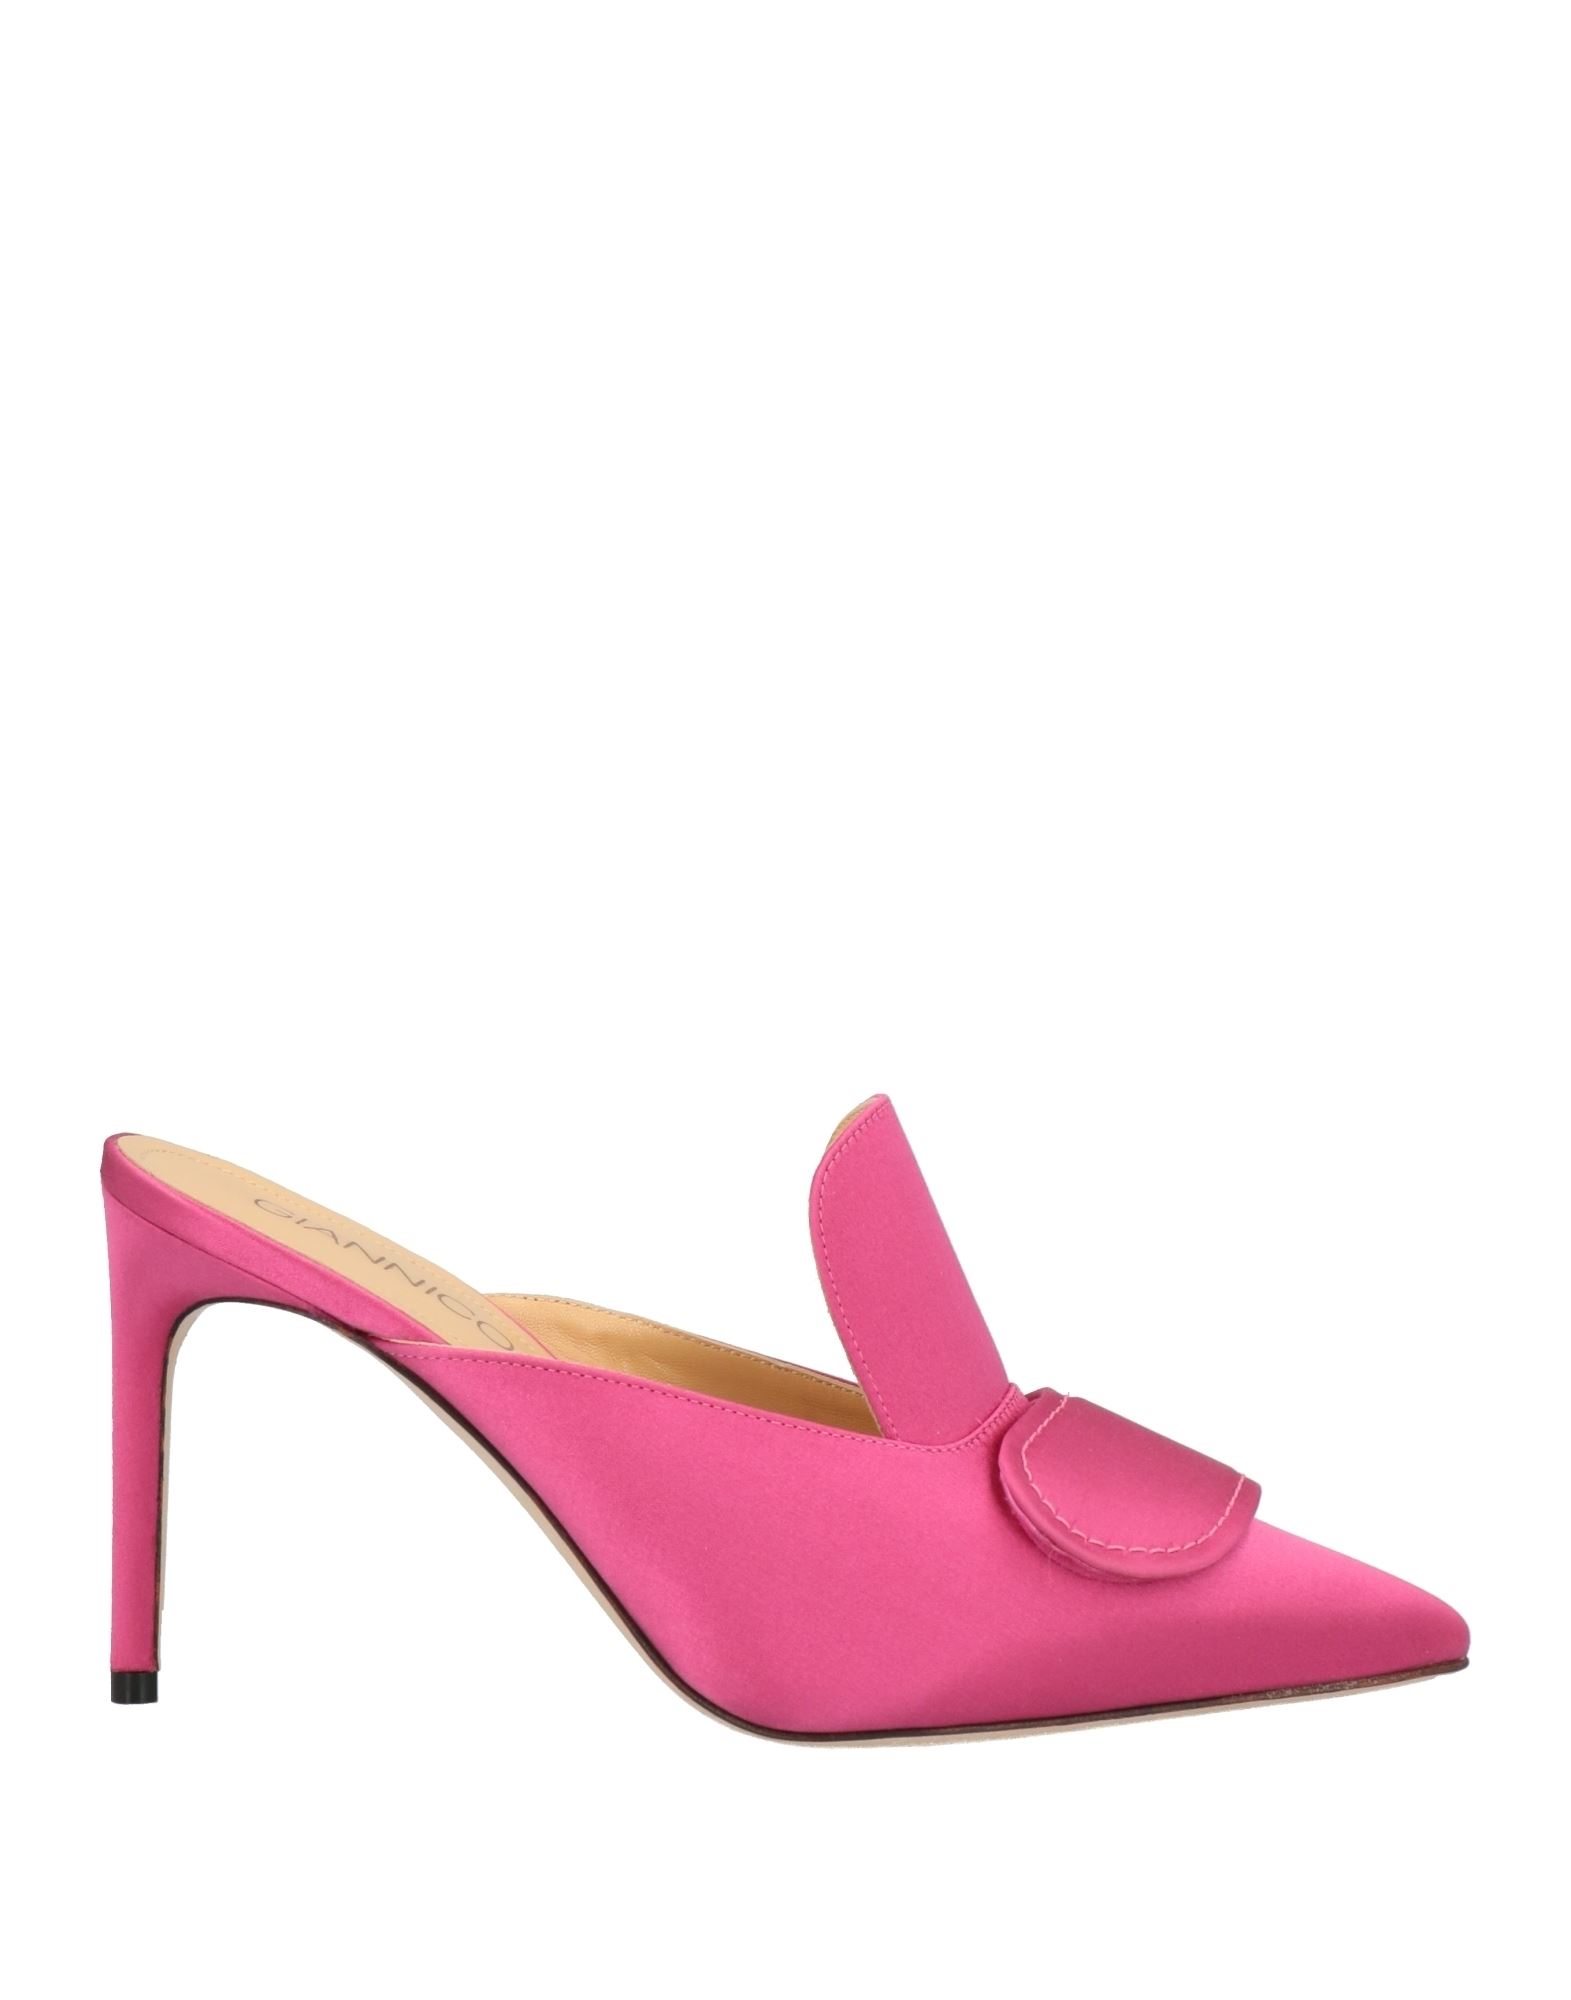 Women's GIANNICO Shoes Sale, Up To 70% Off